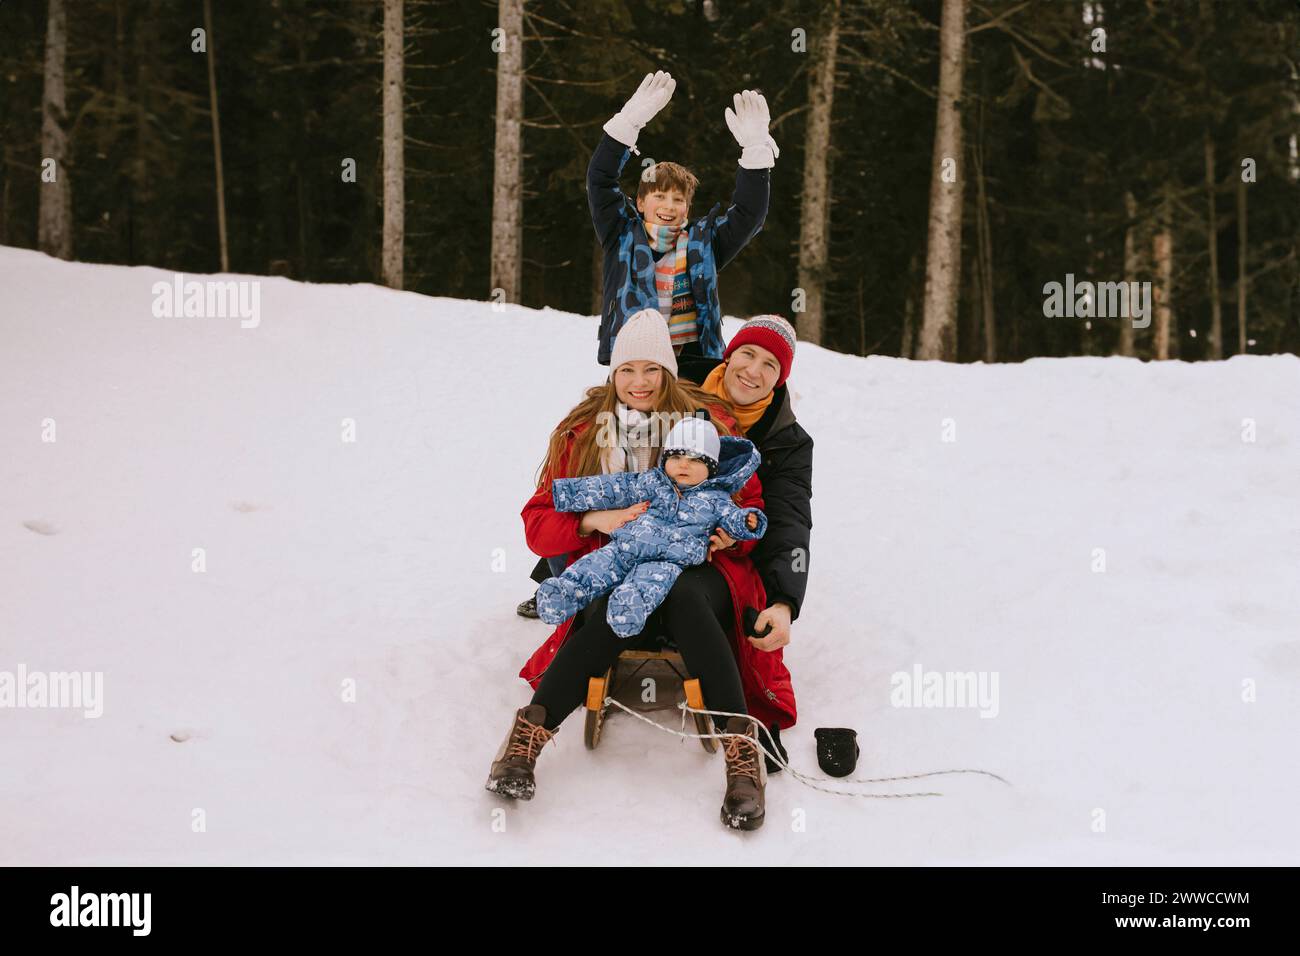 Happy family having fun in winter forest Stock Photo